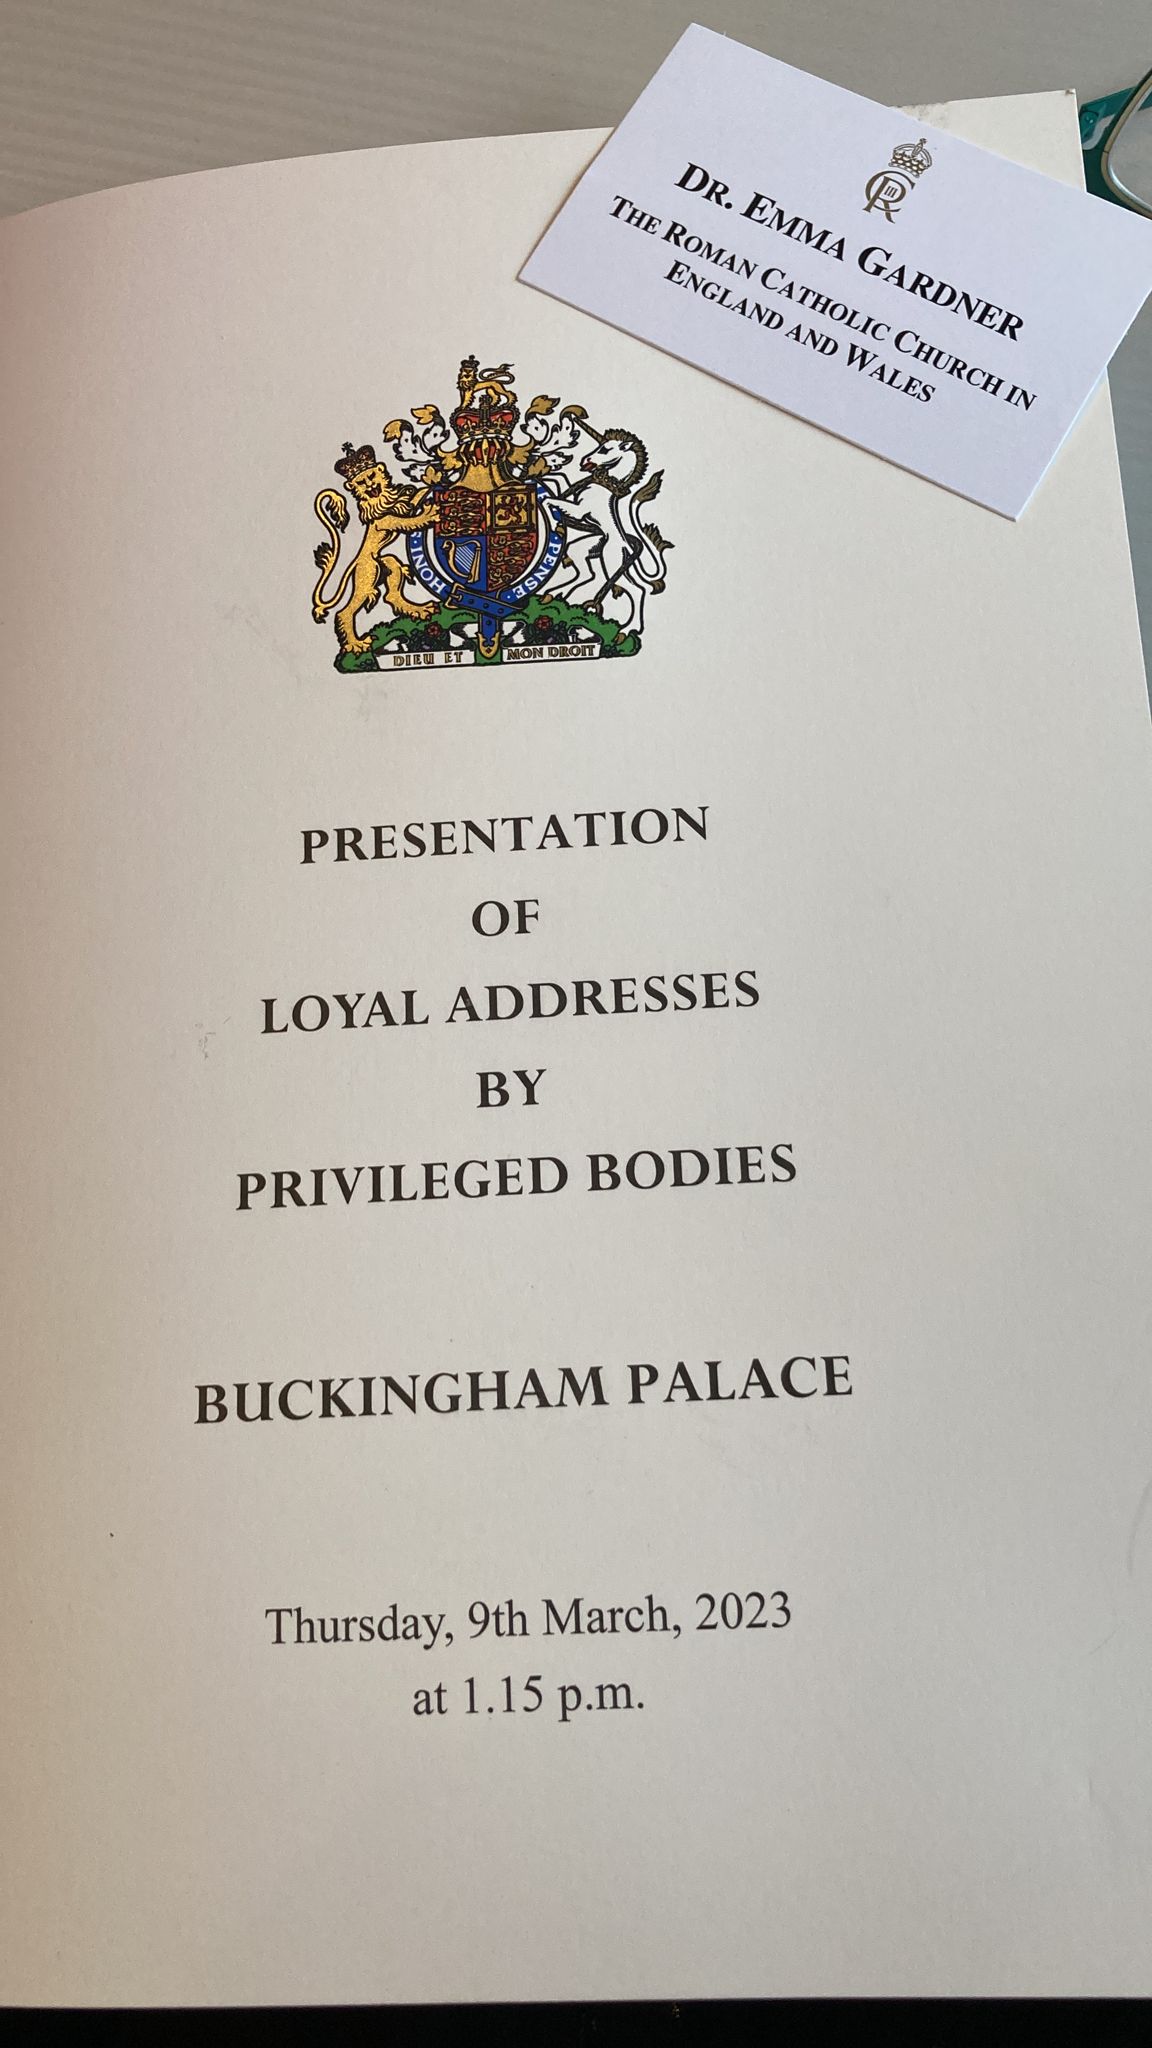 Booklet from Dr Emma Gardner's visit to Buckingham Palace